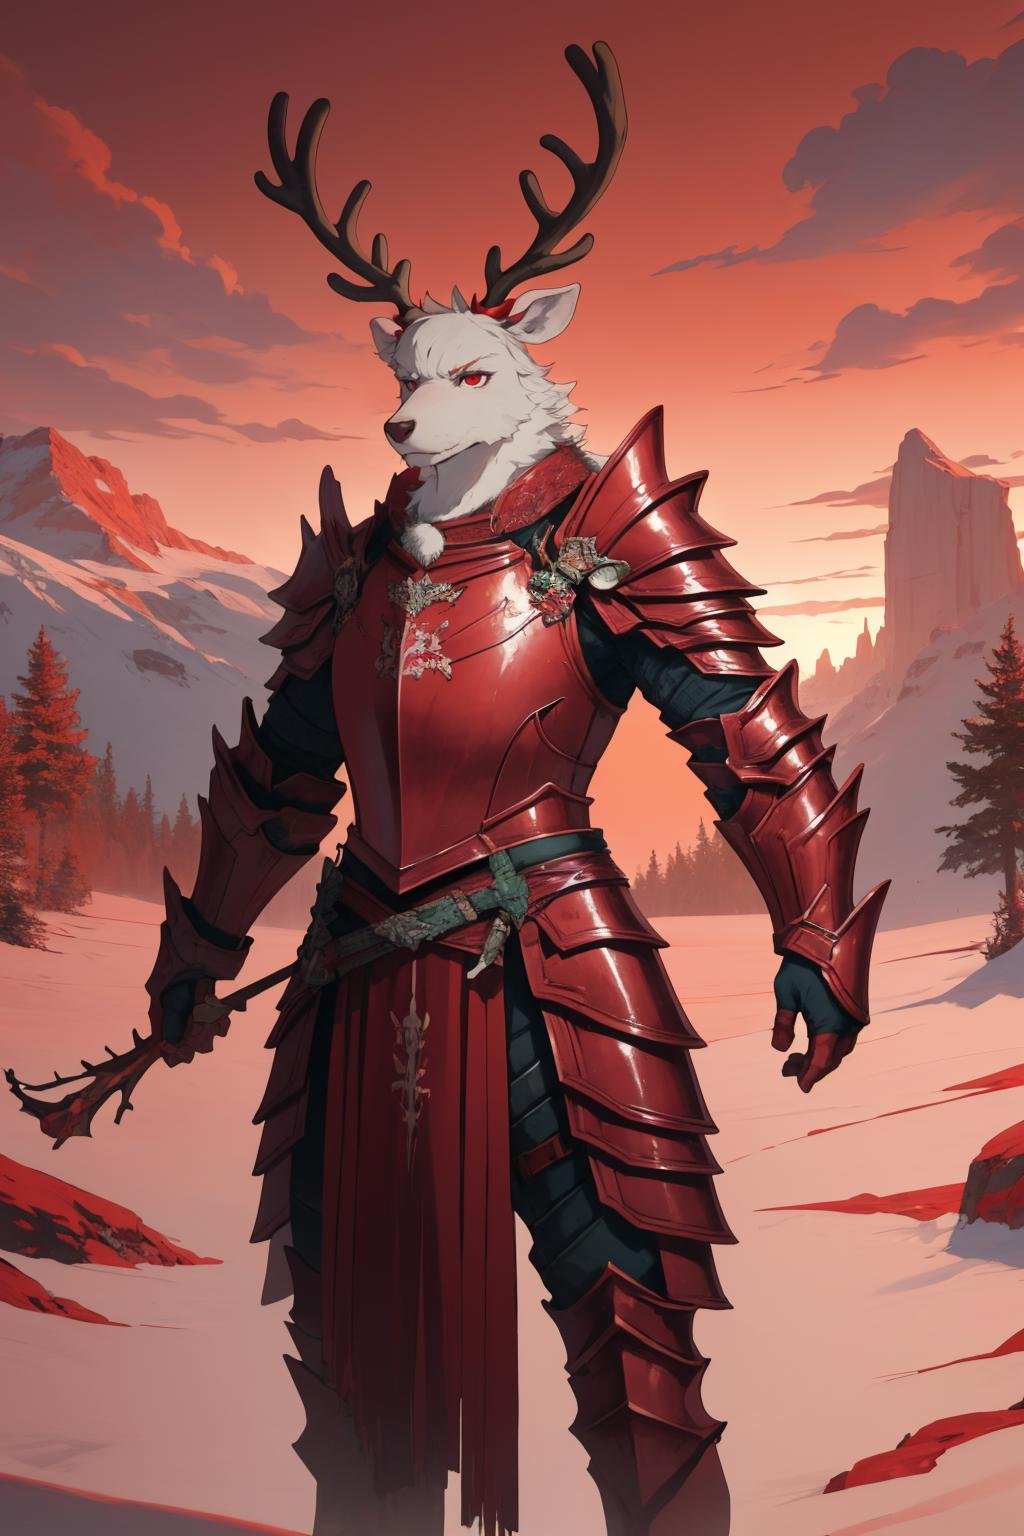 masterpiece, best quality, solo, furry, reindeer antlers, standing, <lora:reindeerknight-oc-richy-v1:1> reindeerknight, armor, full armor, stoic, serene, red theme, angry, mad, looking at viewer, red sky, sunset, red, magical, magic, awesome, scenic, vista, winter, cold, ice, frozen, redice <lora:redice-concept-richy-v1:0.8> 